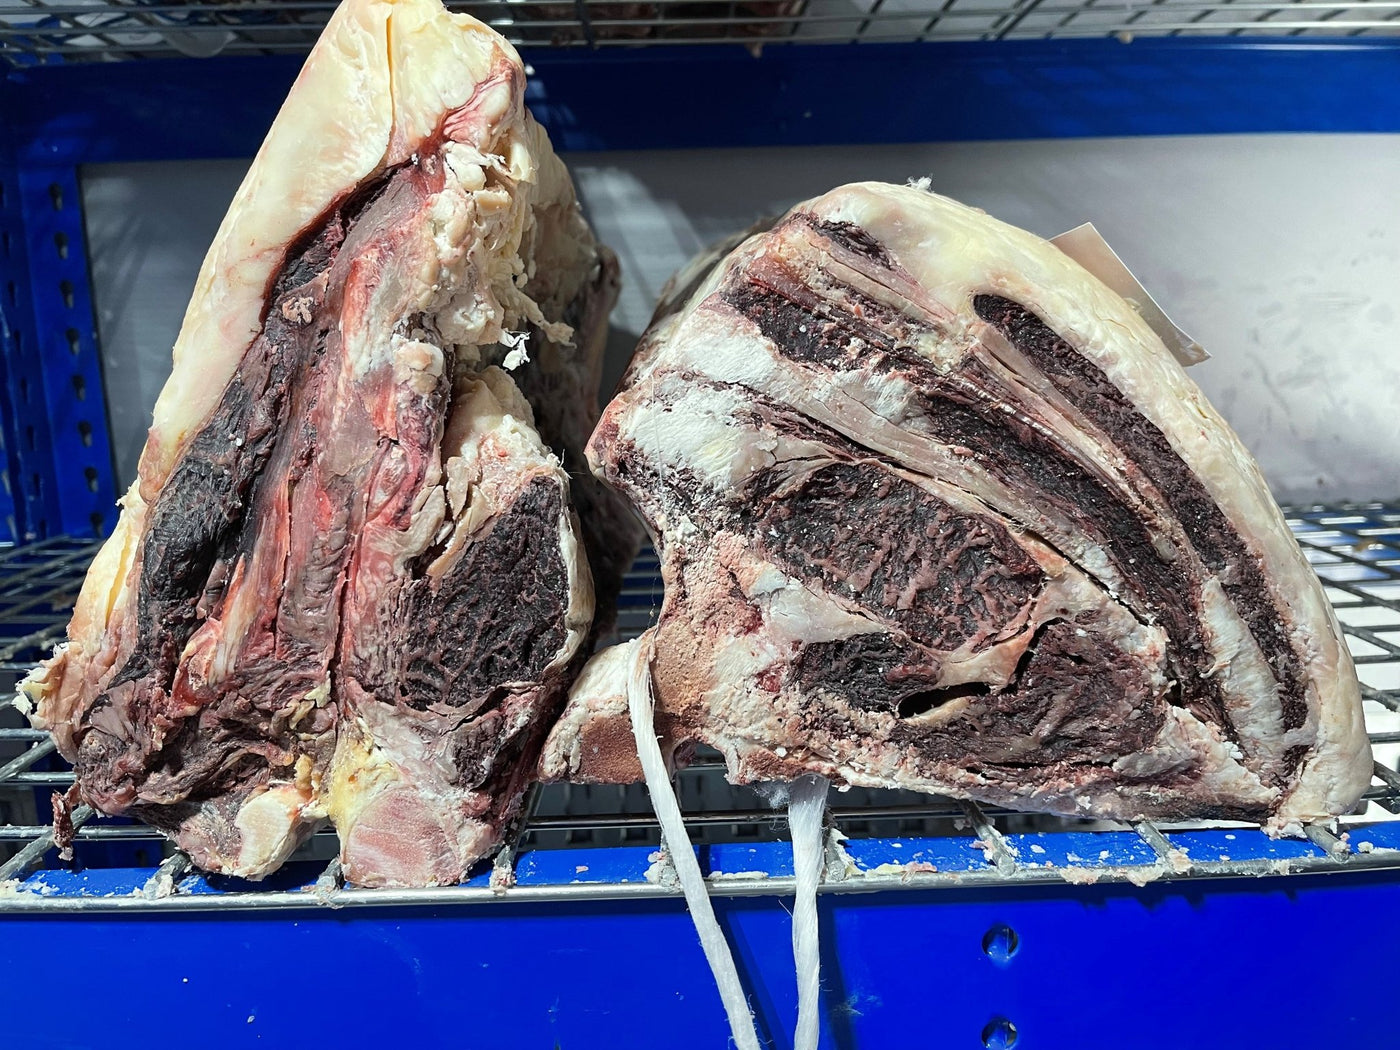 40 Day Dry-Aged "Dark Red", Spanish Ex Dairy - Thomas Joseph Butchery - Ethical Dry-Aged Meat The Best Steak UK Thomas Joseph Butchery